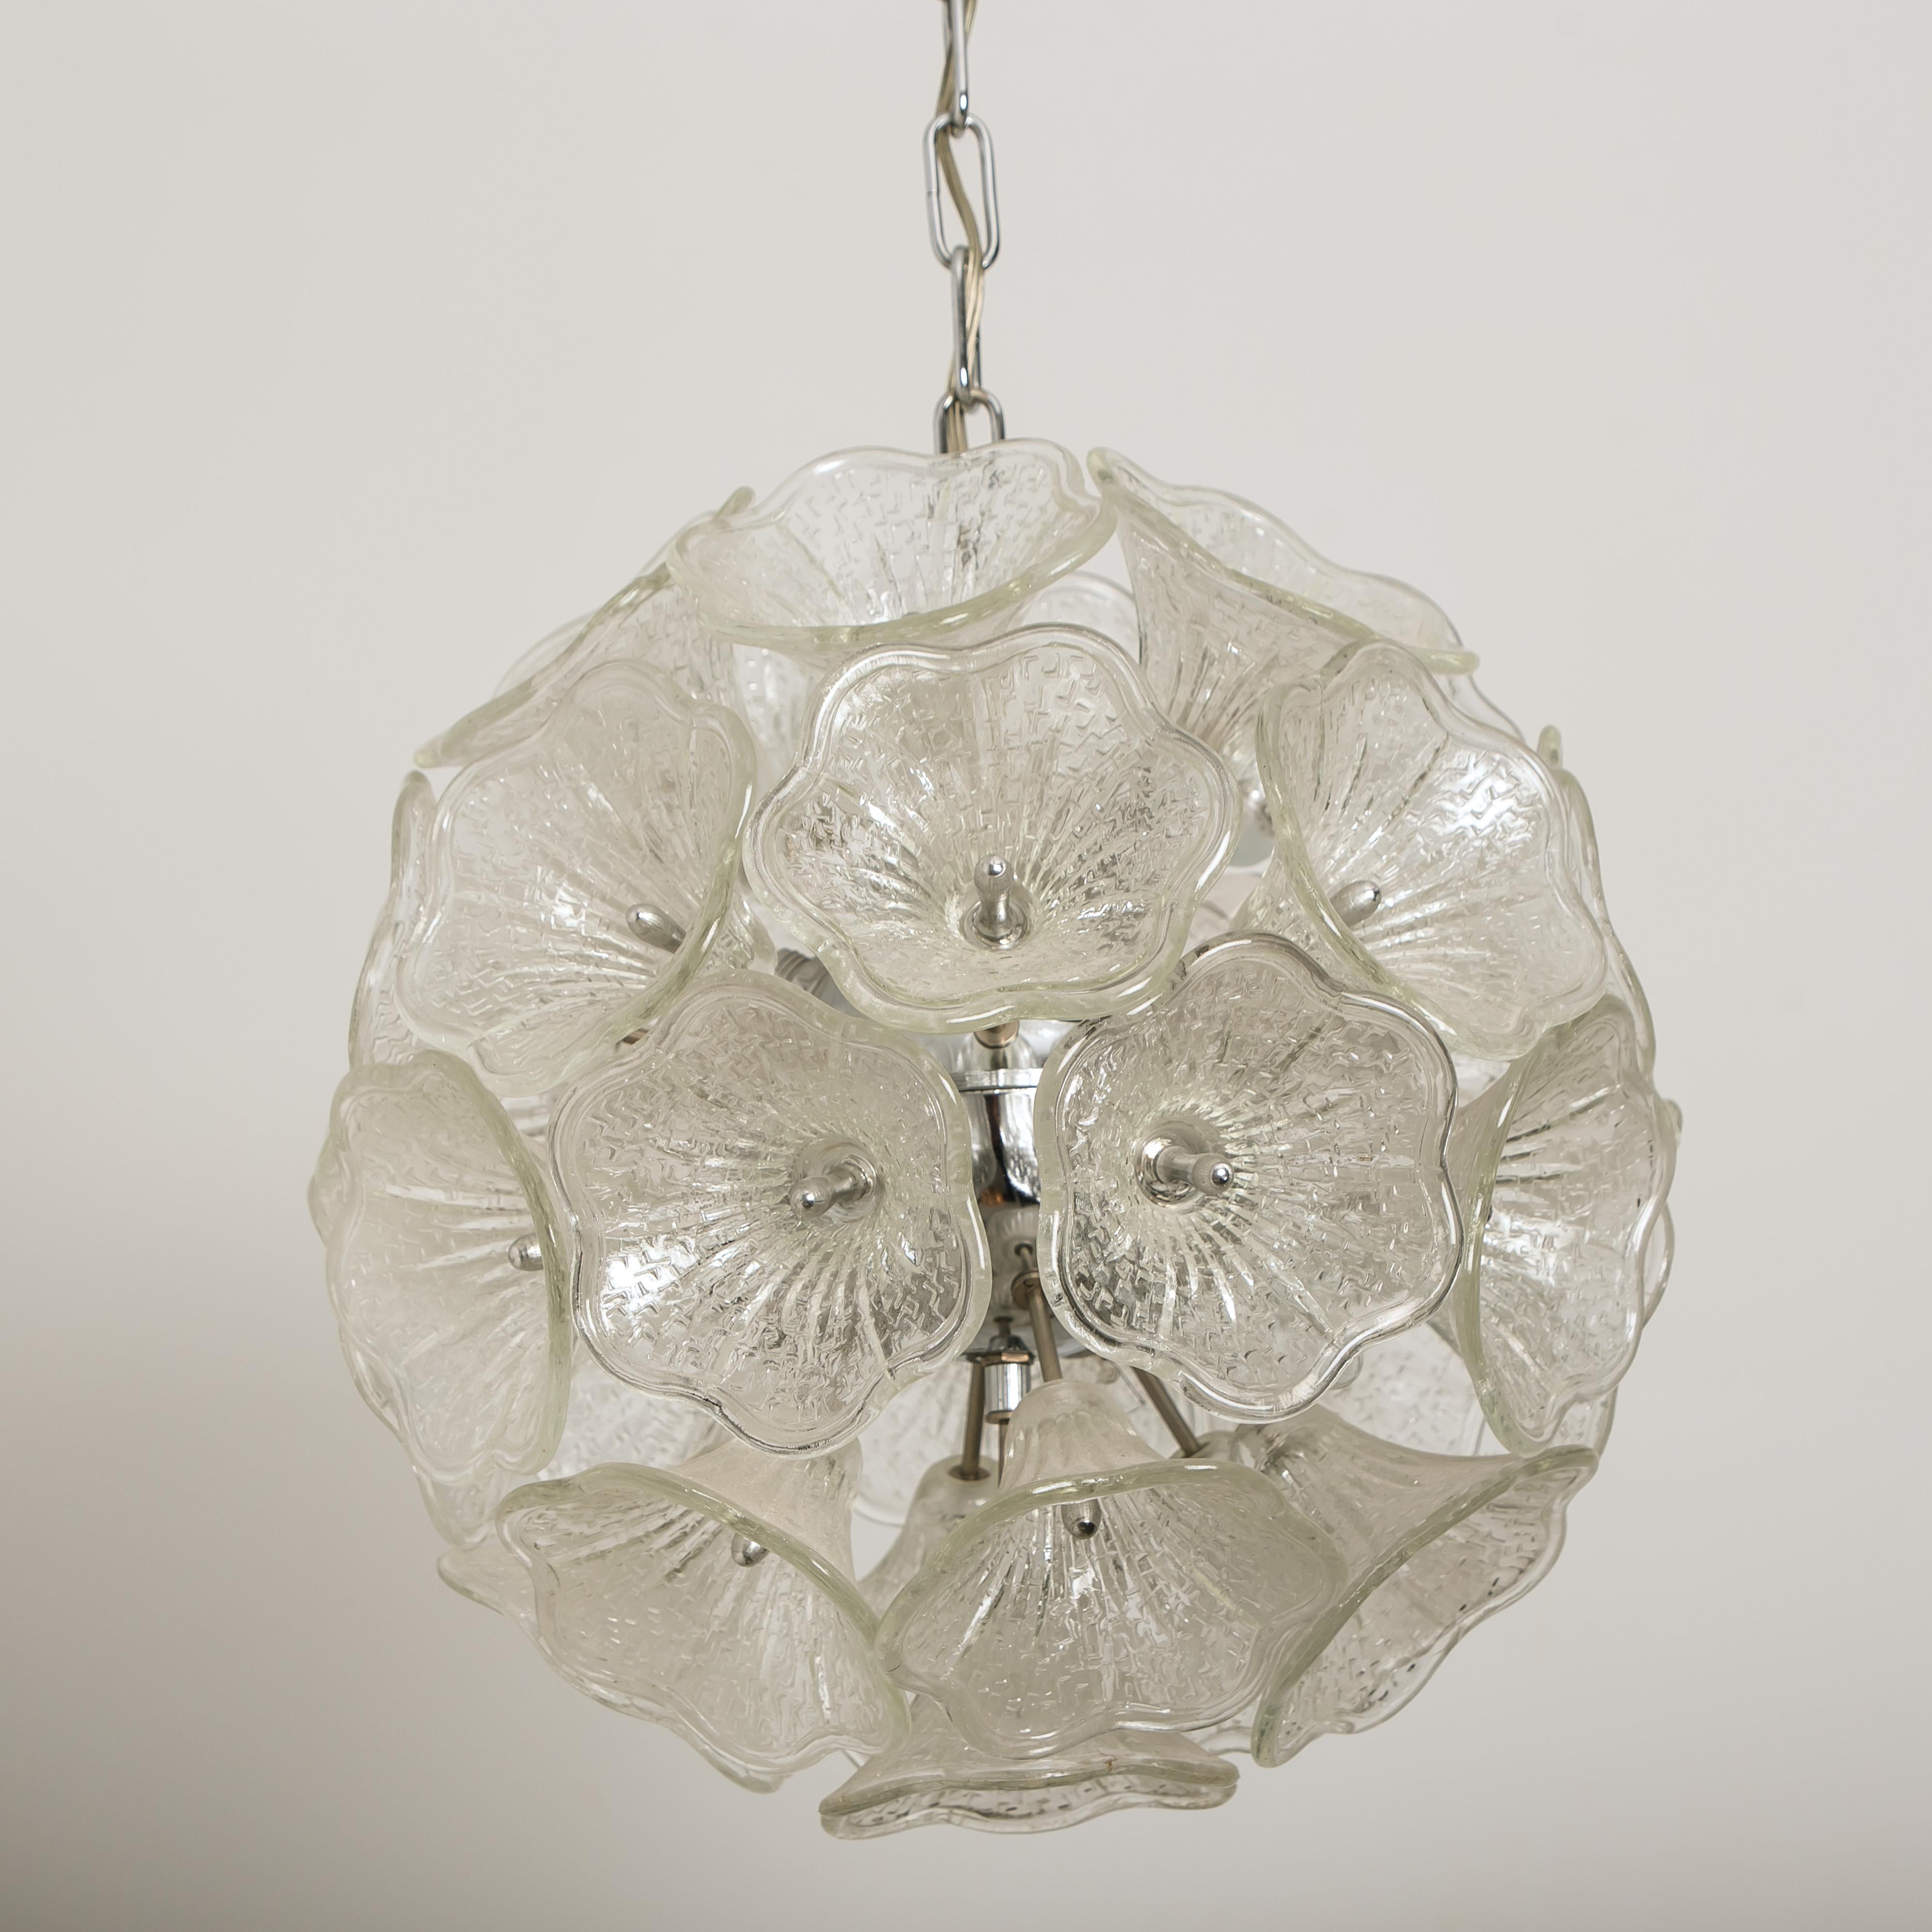 Italian Sputnik Murano Glass and Chrome Chandelier in the Style of Venini, 1960s For Sale